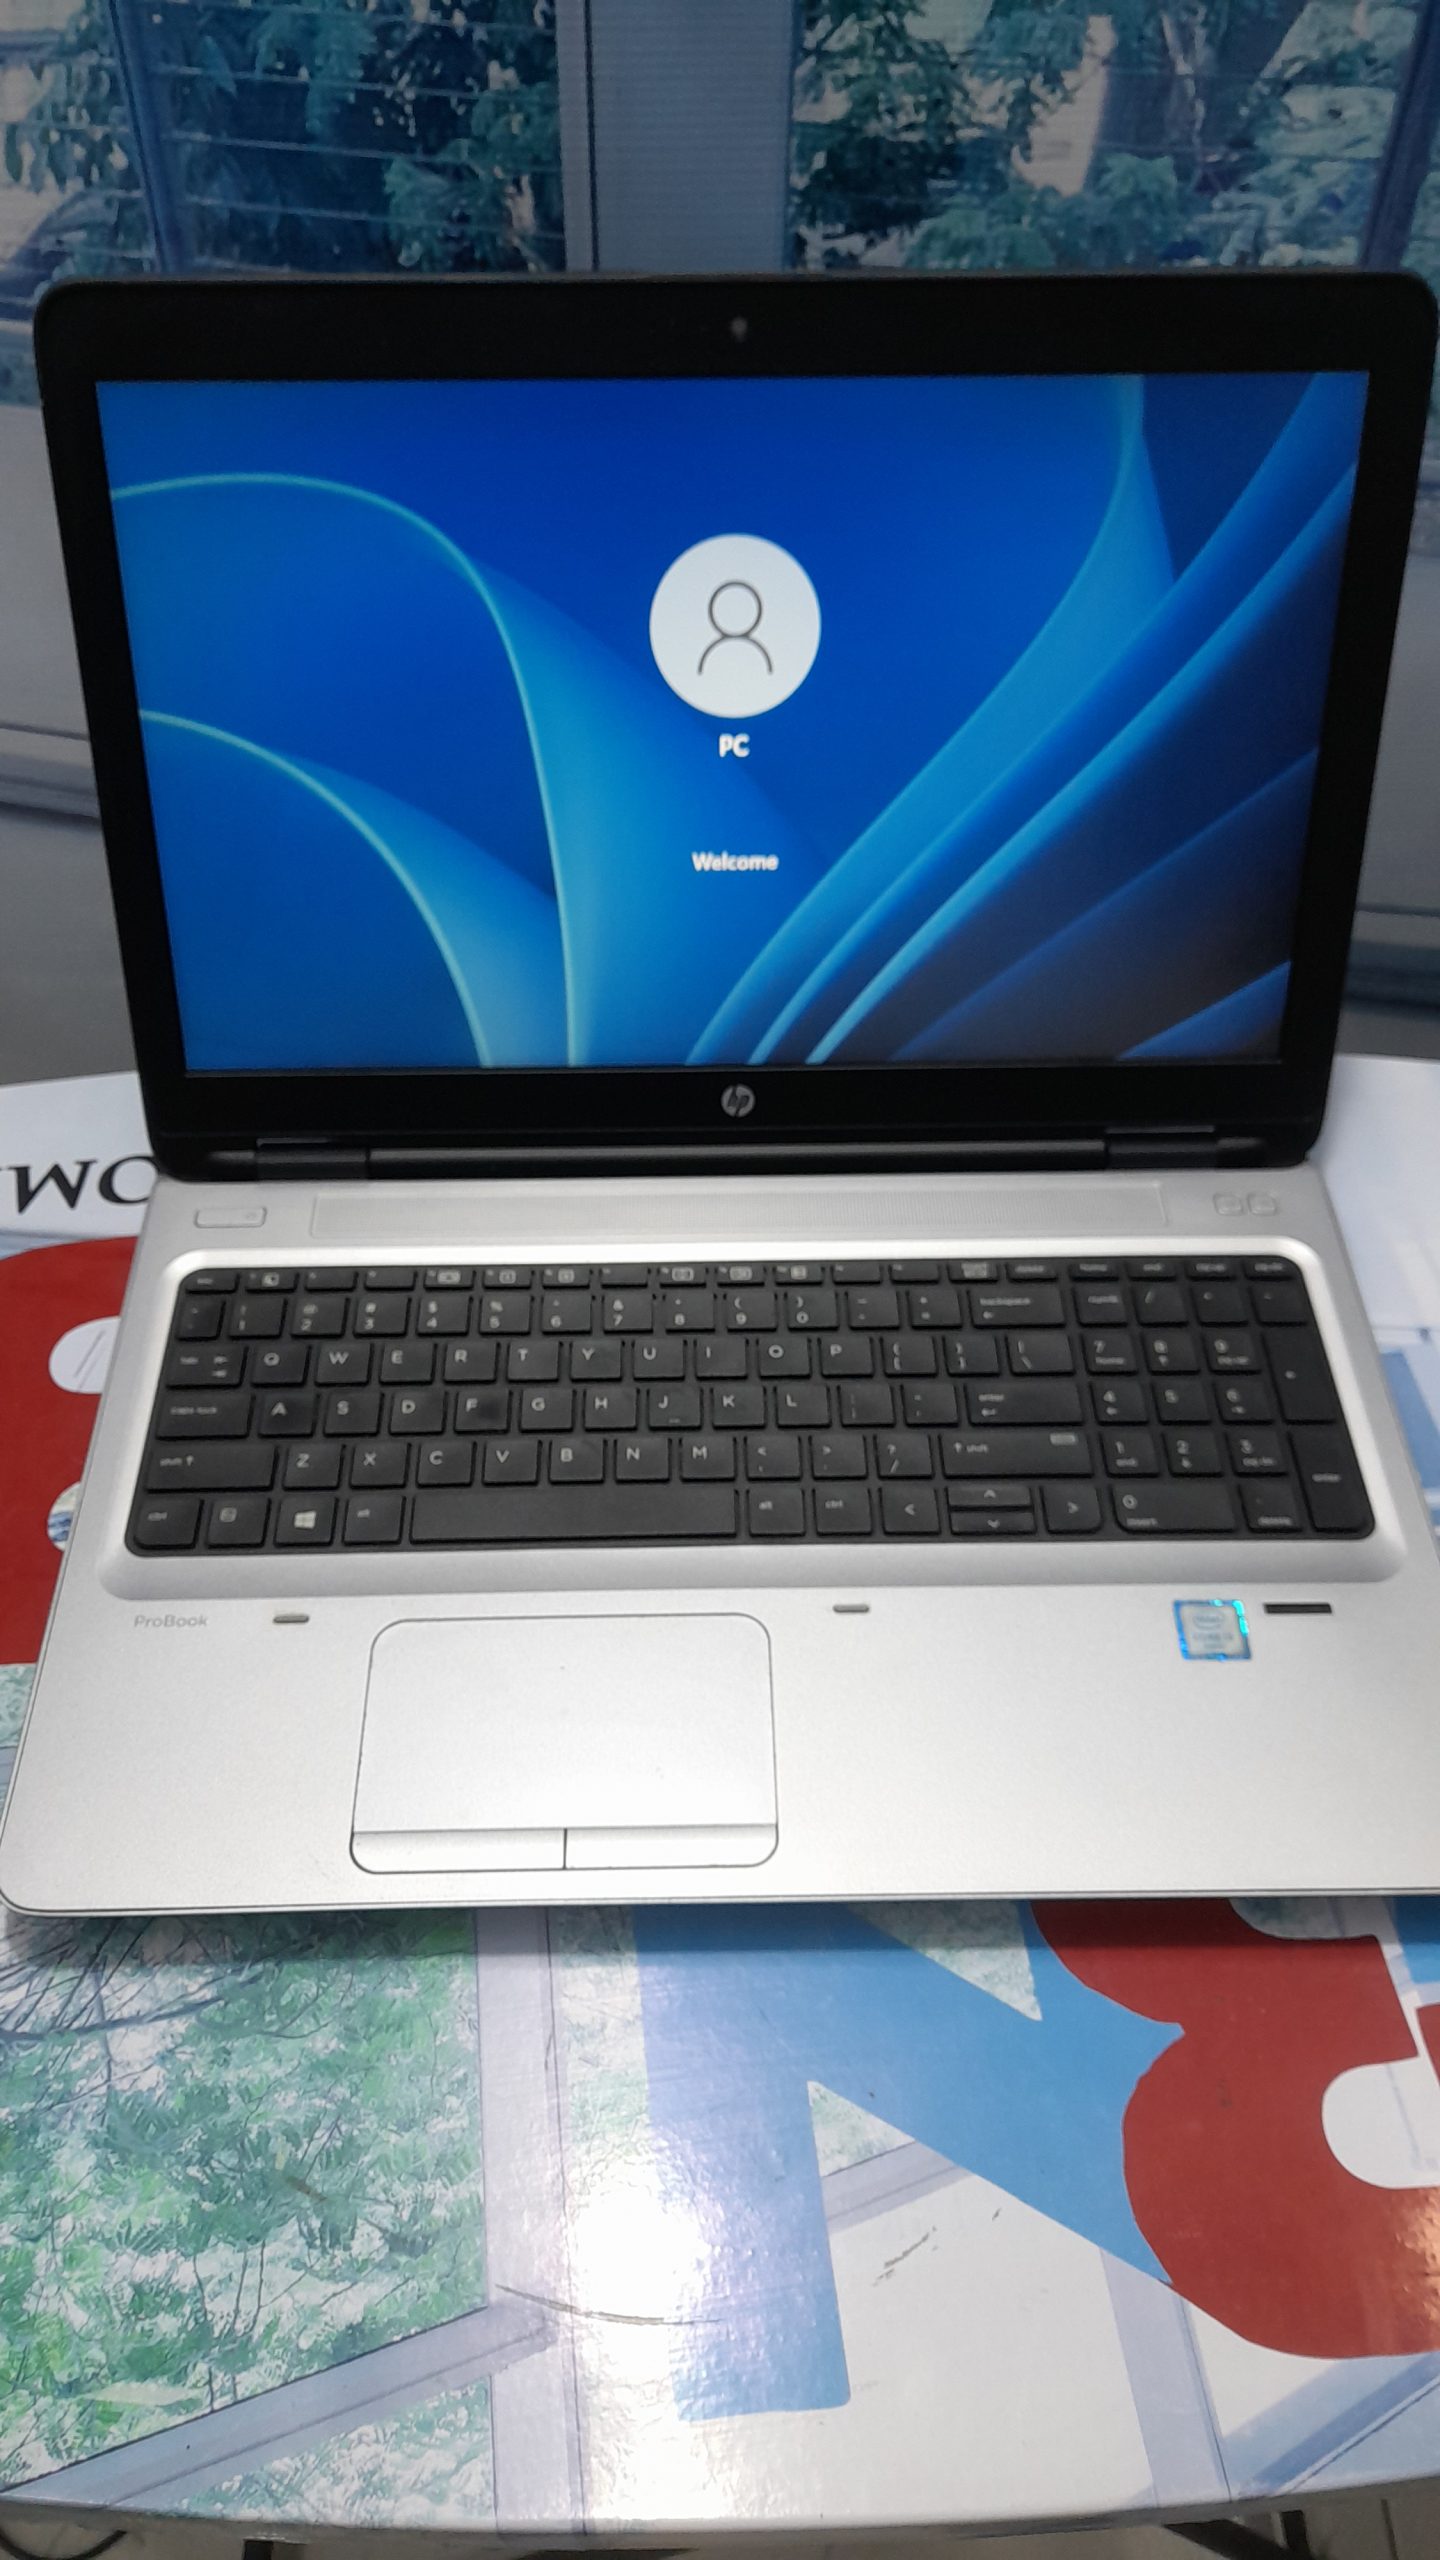 Hp 650 g2 6th Gen. intel core i3 4G RAM 500G HDD , uk used dell laptop for sale in lagos at wholesale prise, laptop warehouse in ikeja, laptop shops in computer village, uk used laptop in computer village ikeja, buy sell swap laptop in ikeja, free delivery laptop